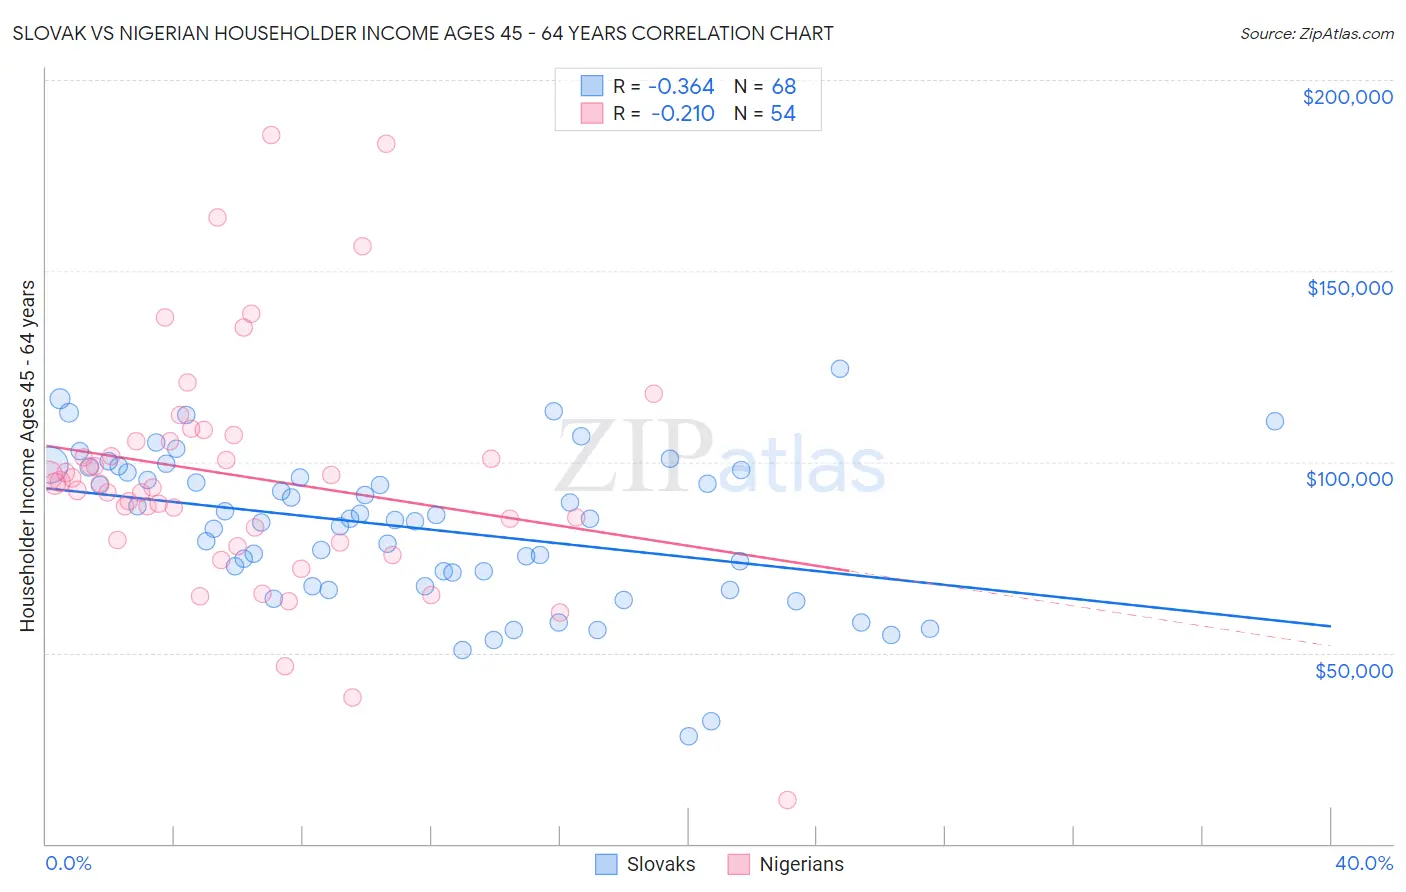 Slovak vs Nigerian Householder Income Ages 45 - 64 years